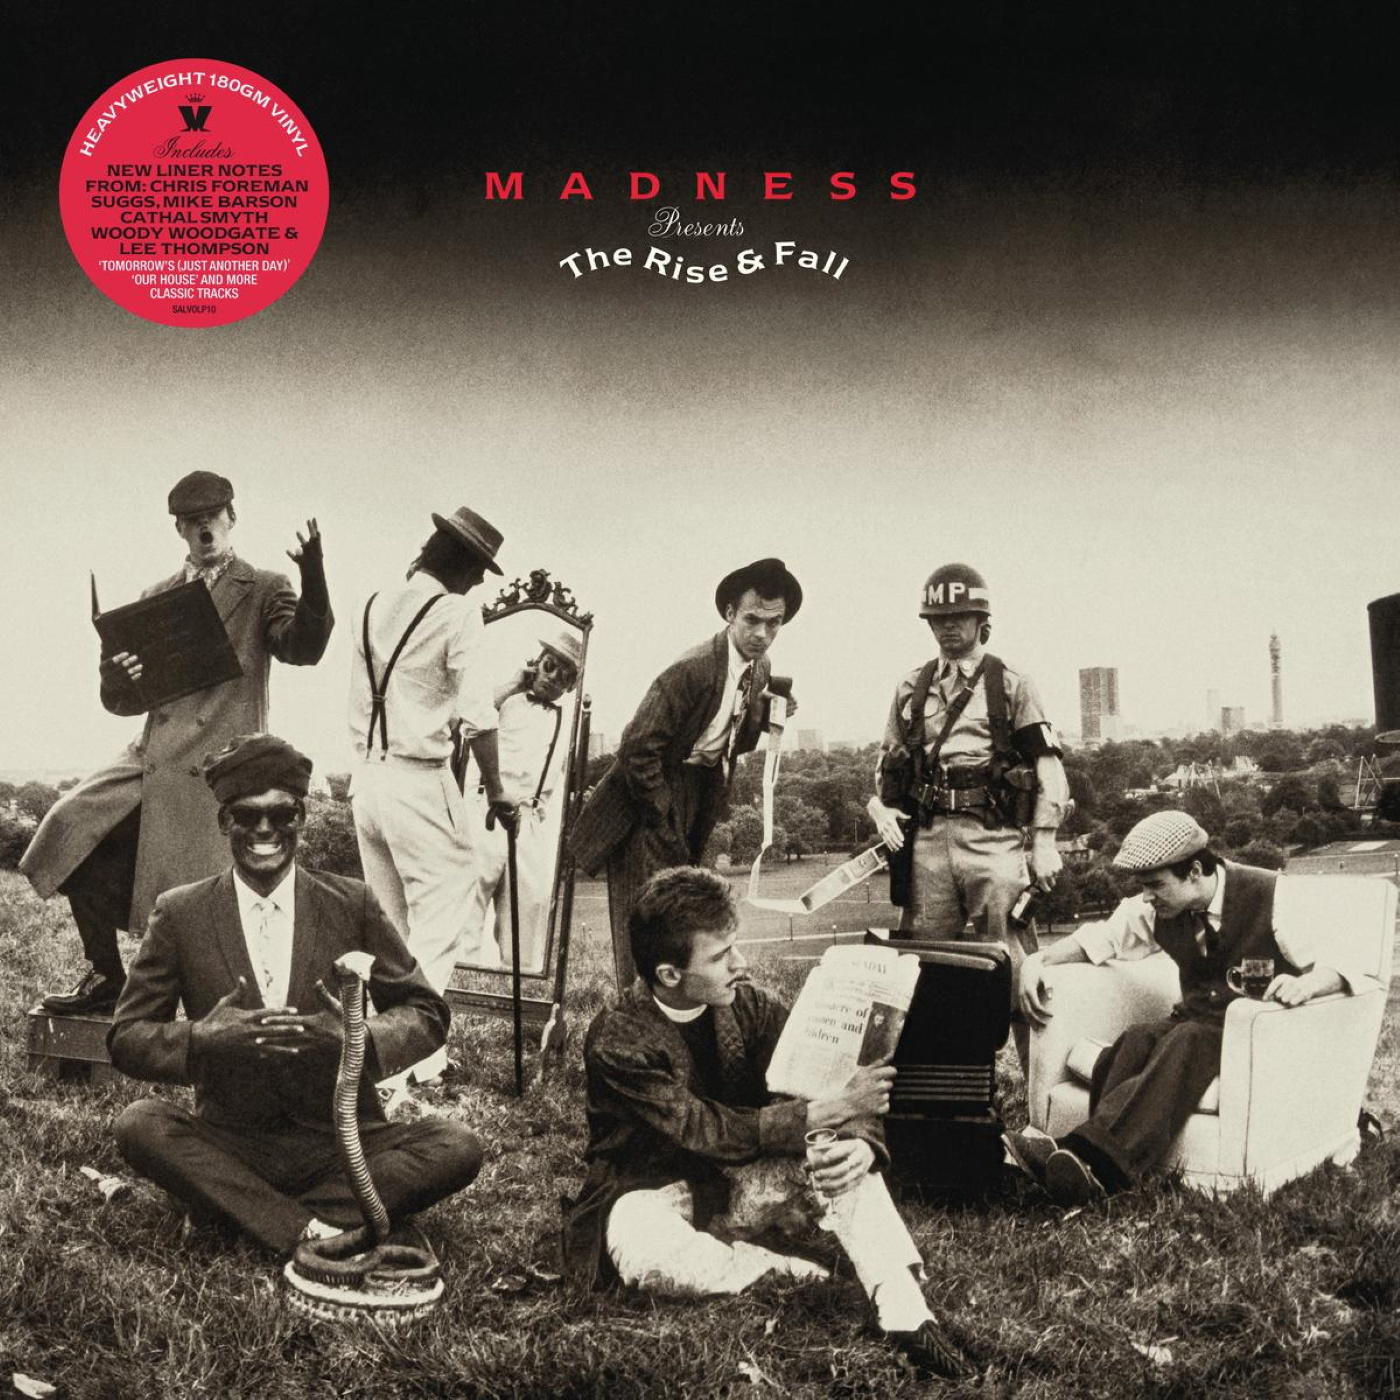 And The Madness - Rise Fall (Vinyl) -